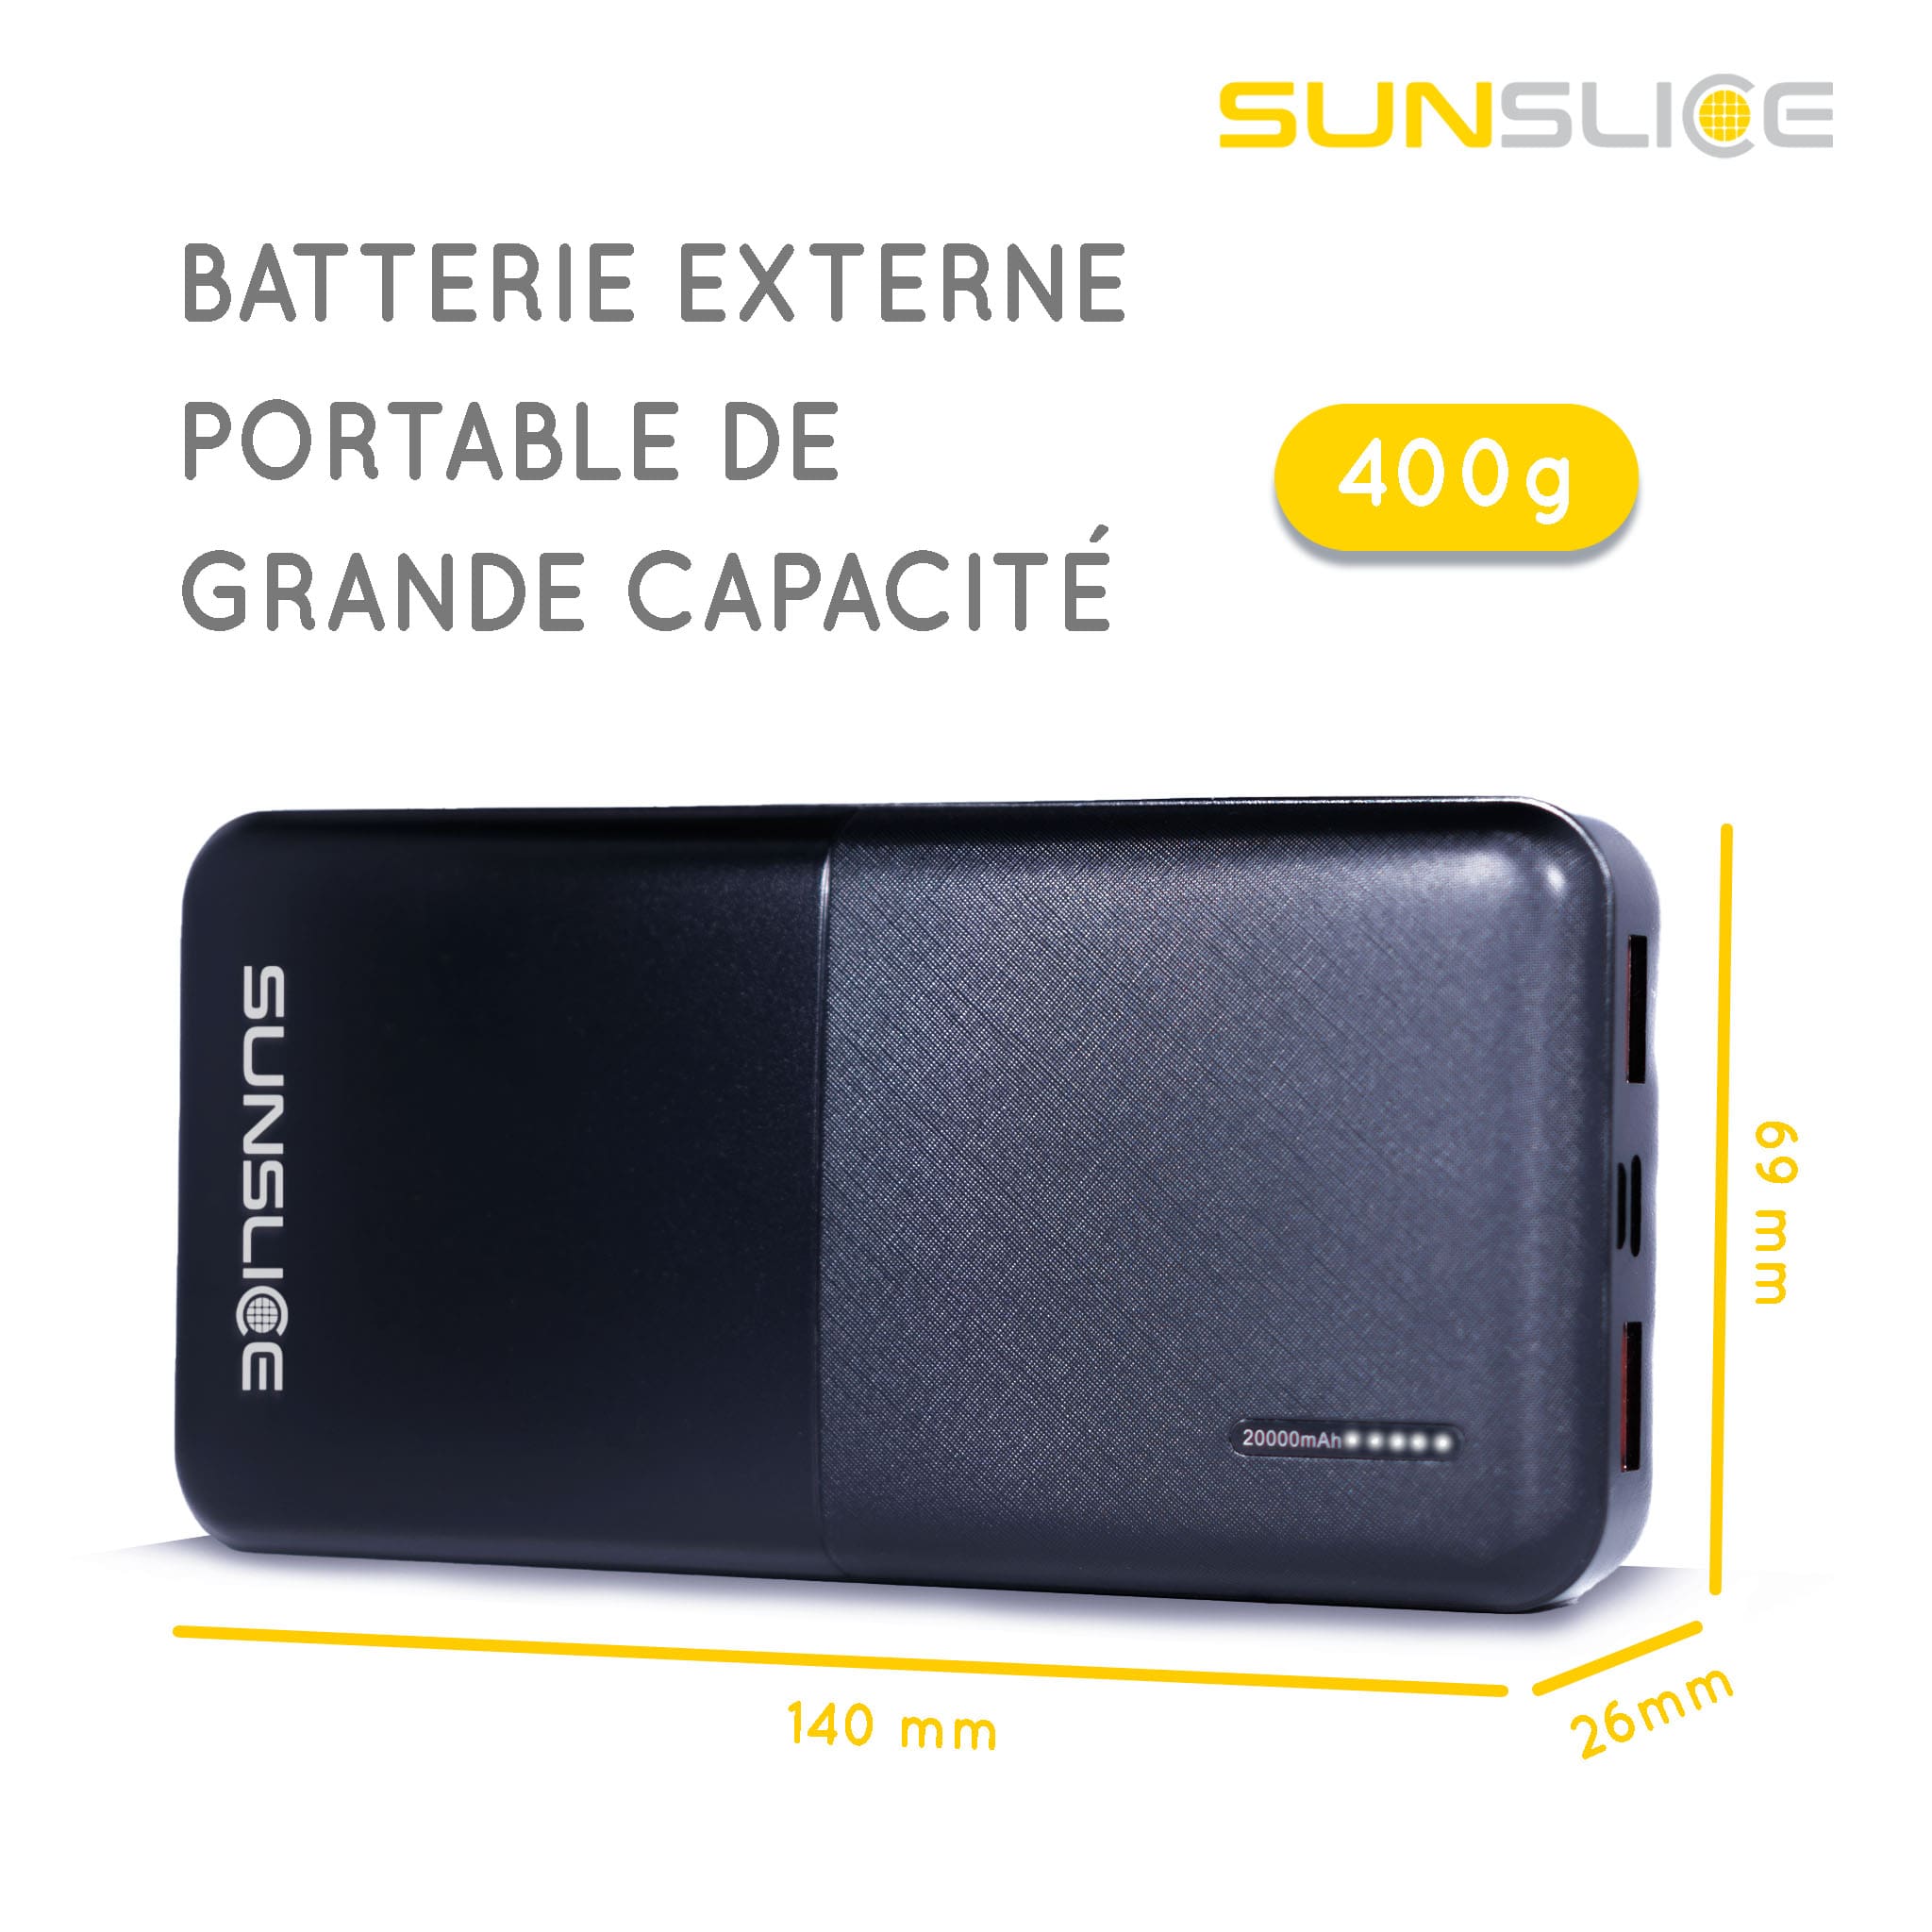 Taille du power bank Gravity 20 : 140 mm, 26 mm, 69 mm. Poids : 400g